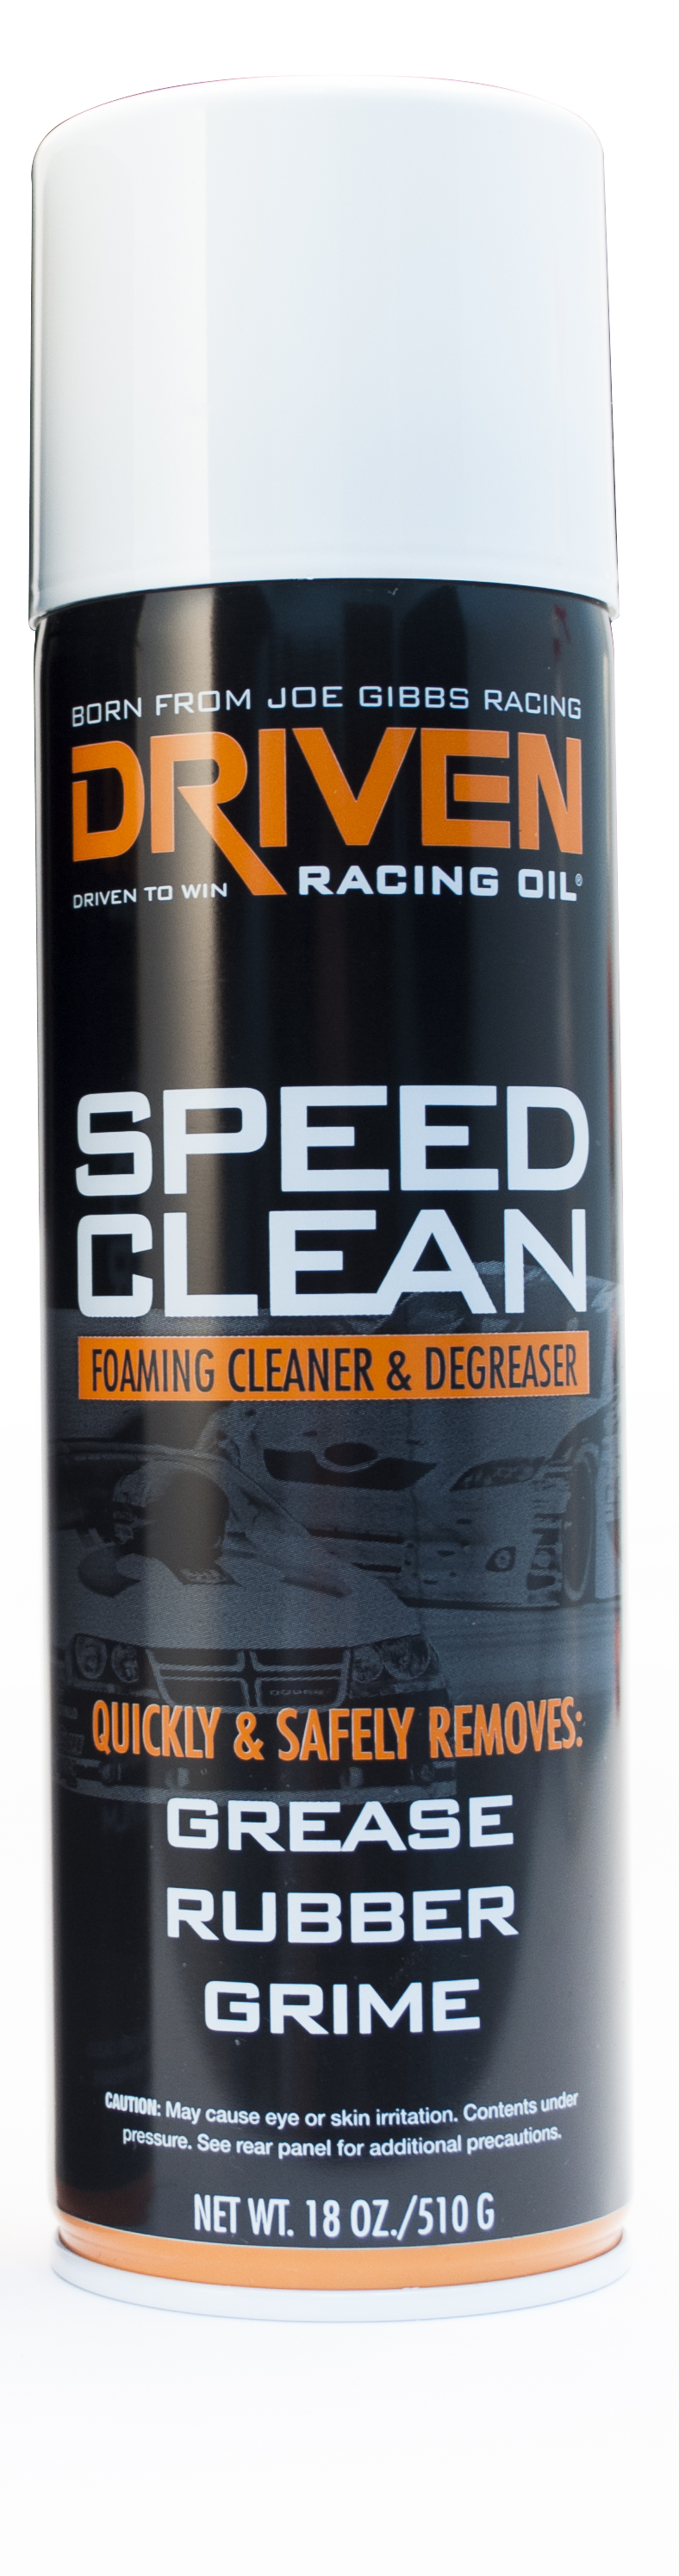 Driven Foamy Degreaser Aerosol Can - 510g Can 50010